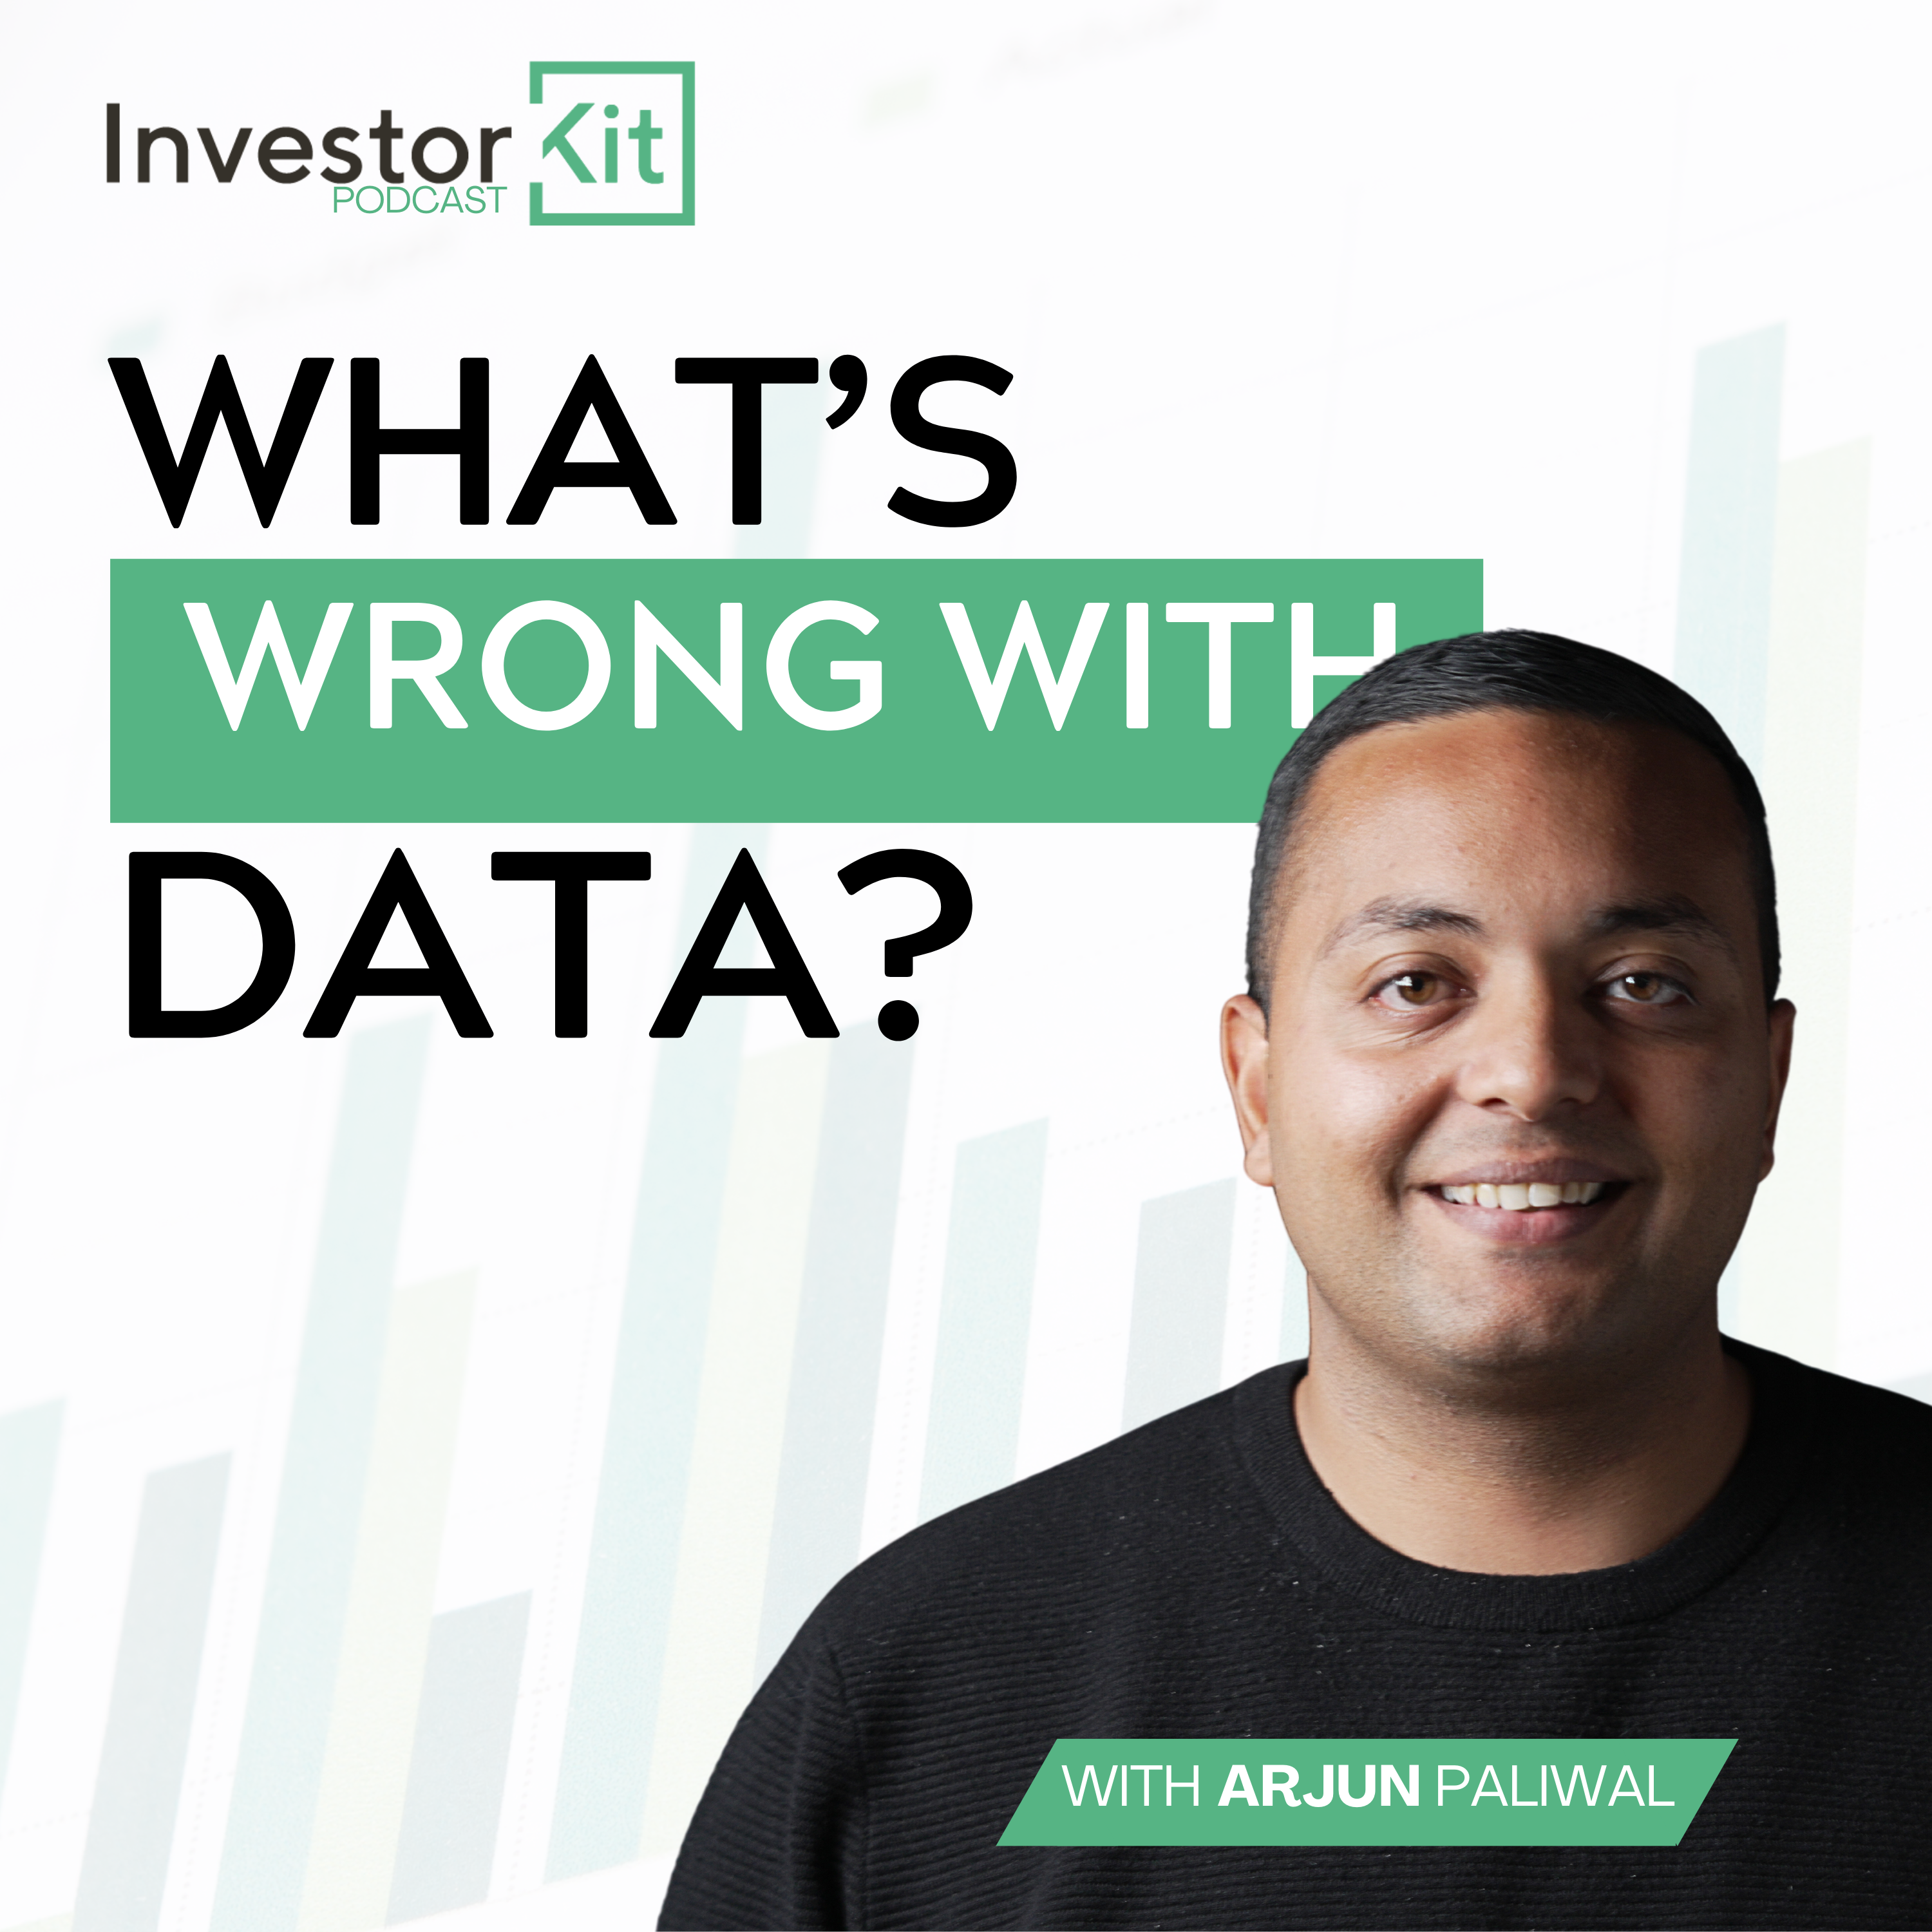 What's Wrong With Data? How These Data Points Could Cripple Your Portfolio!